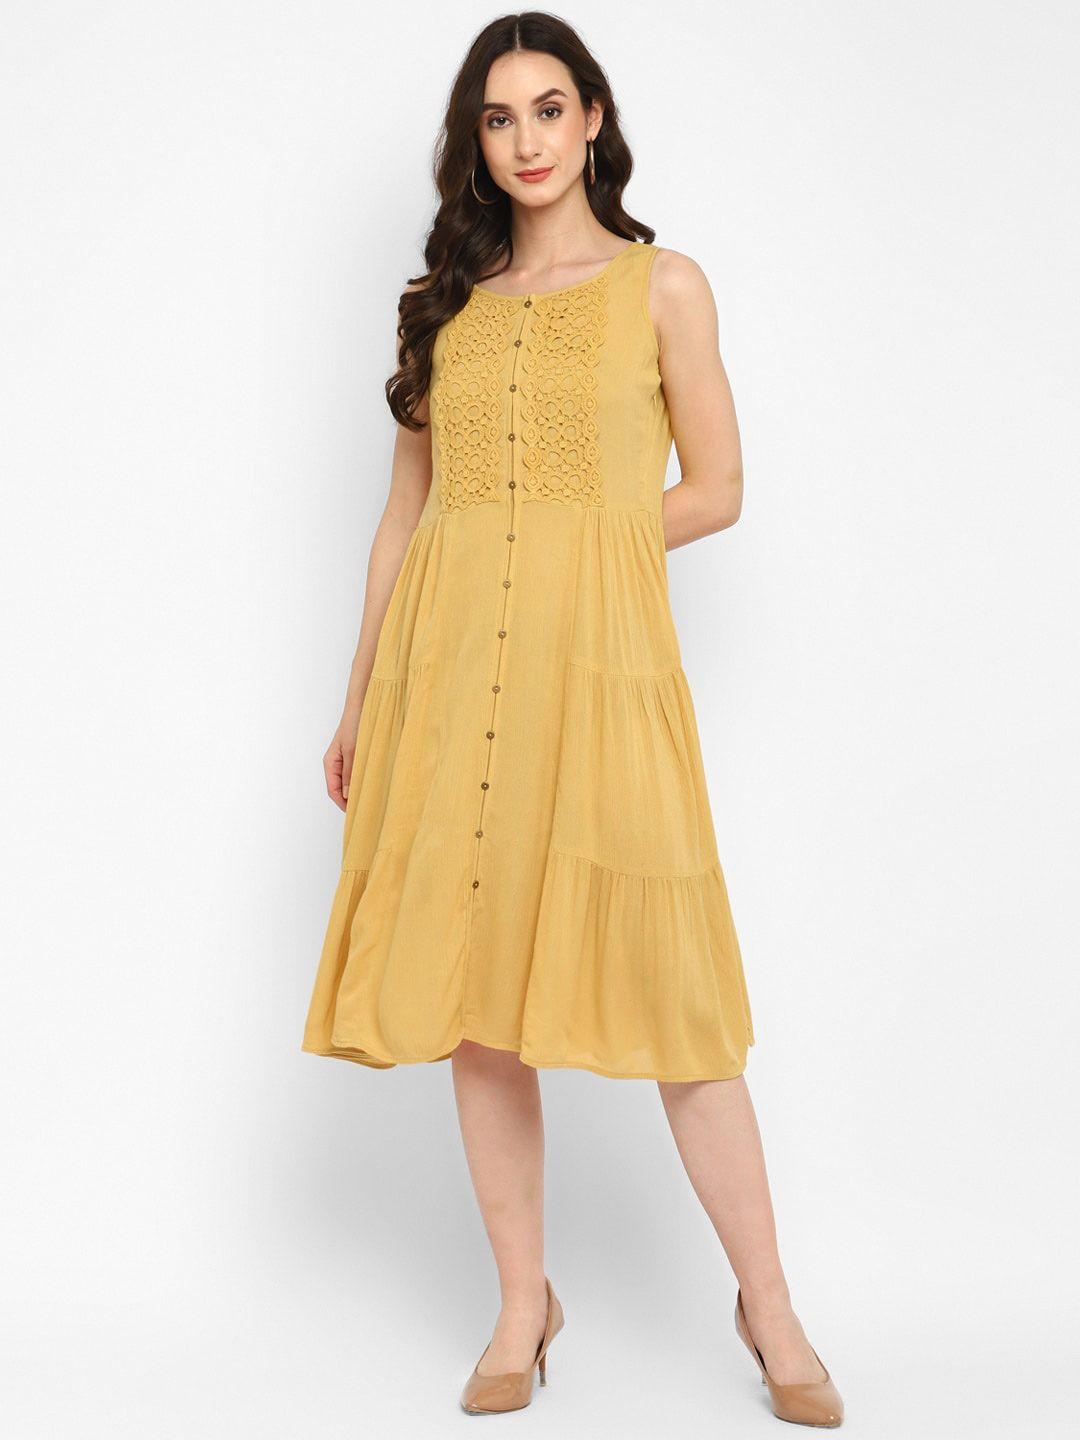 taurus-tiered-round-neck-sleeveless-fit-and-flare-dress